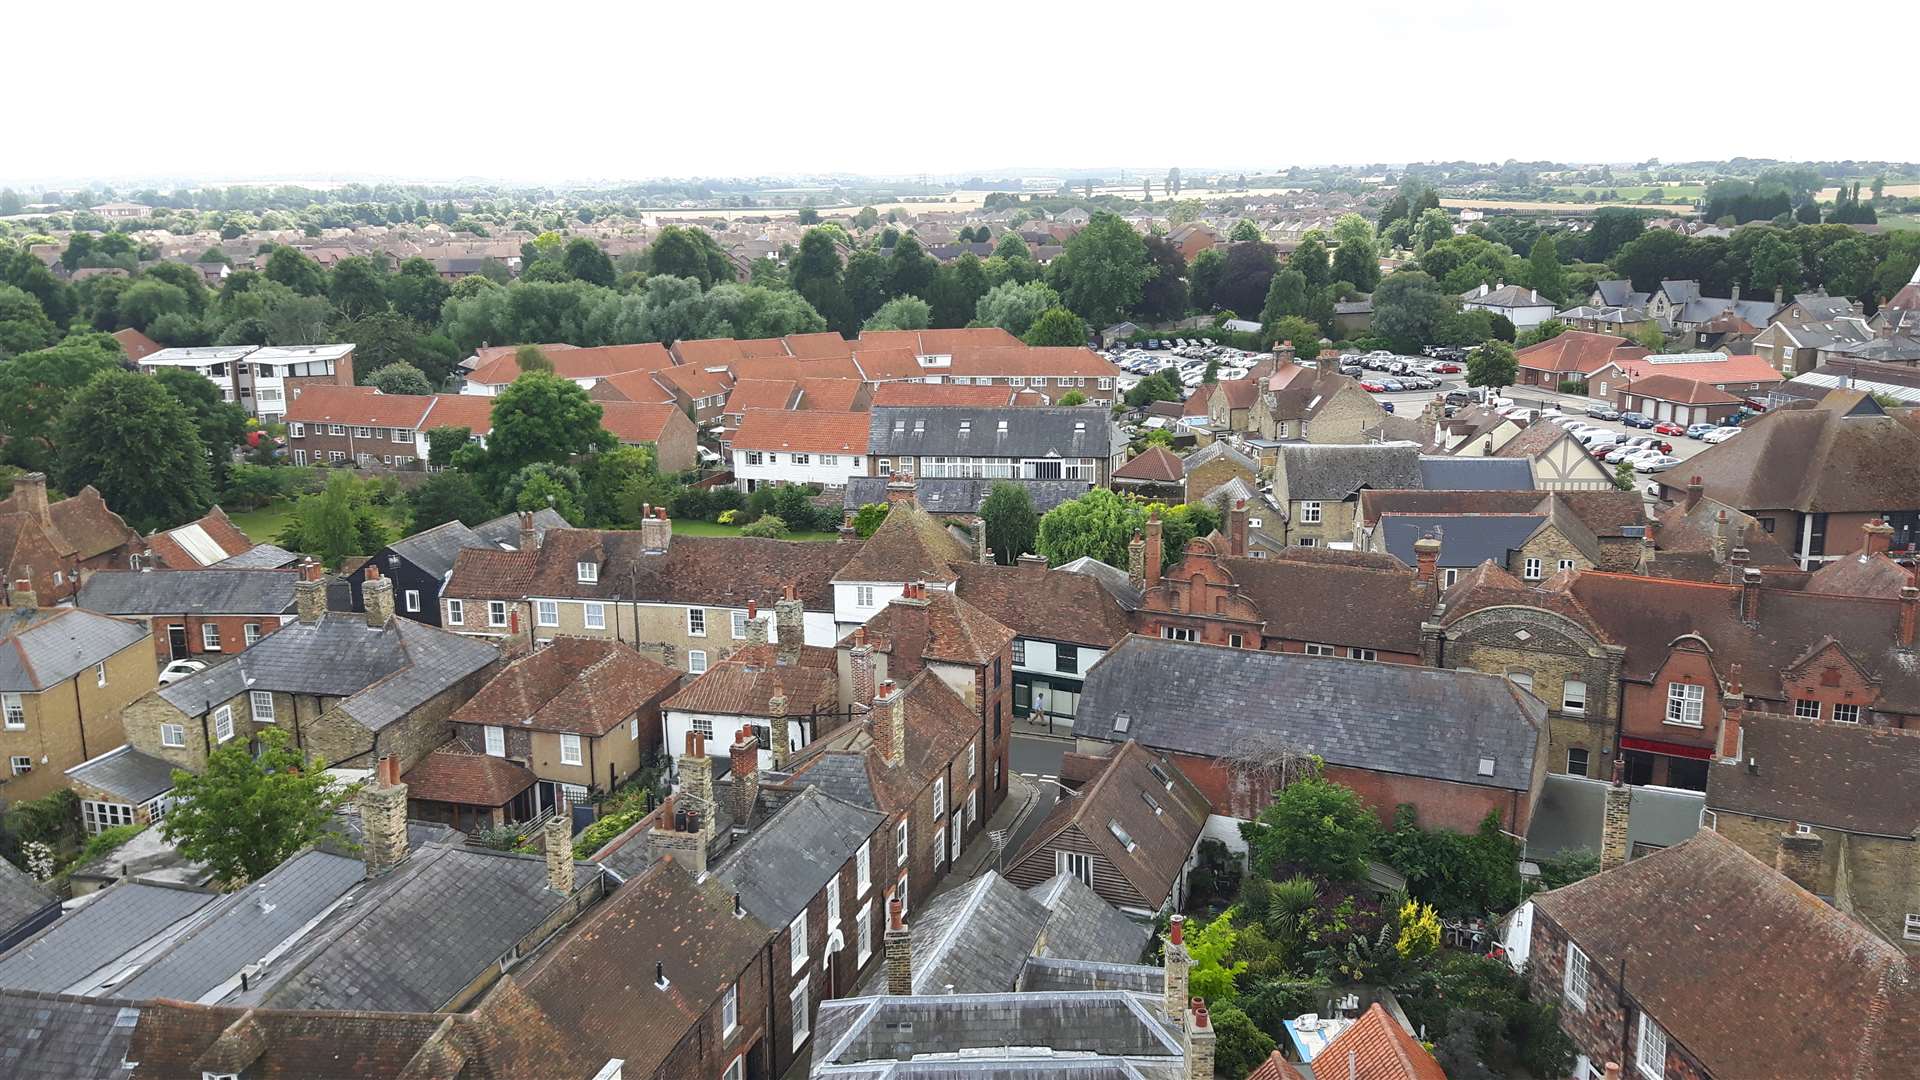 The tour offers an unparalleled view of the most complete medieval town in England